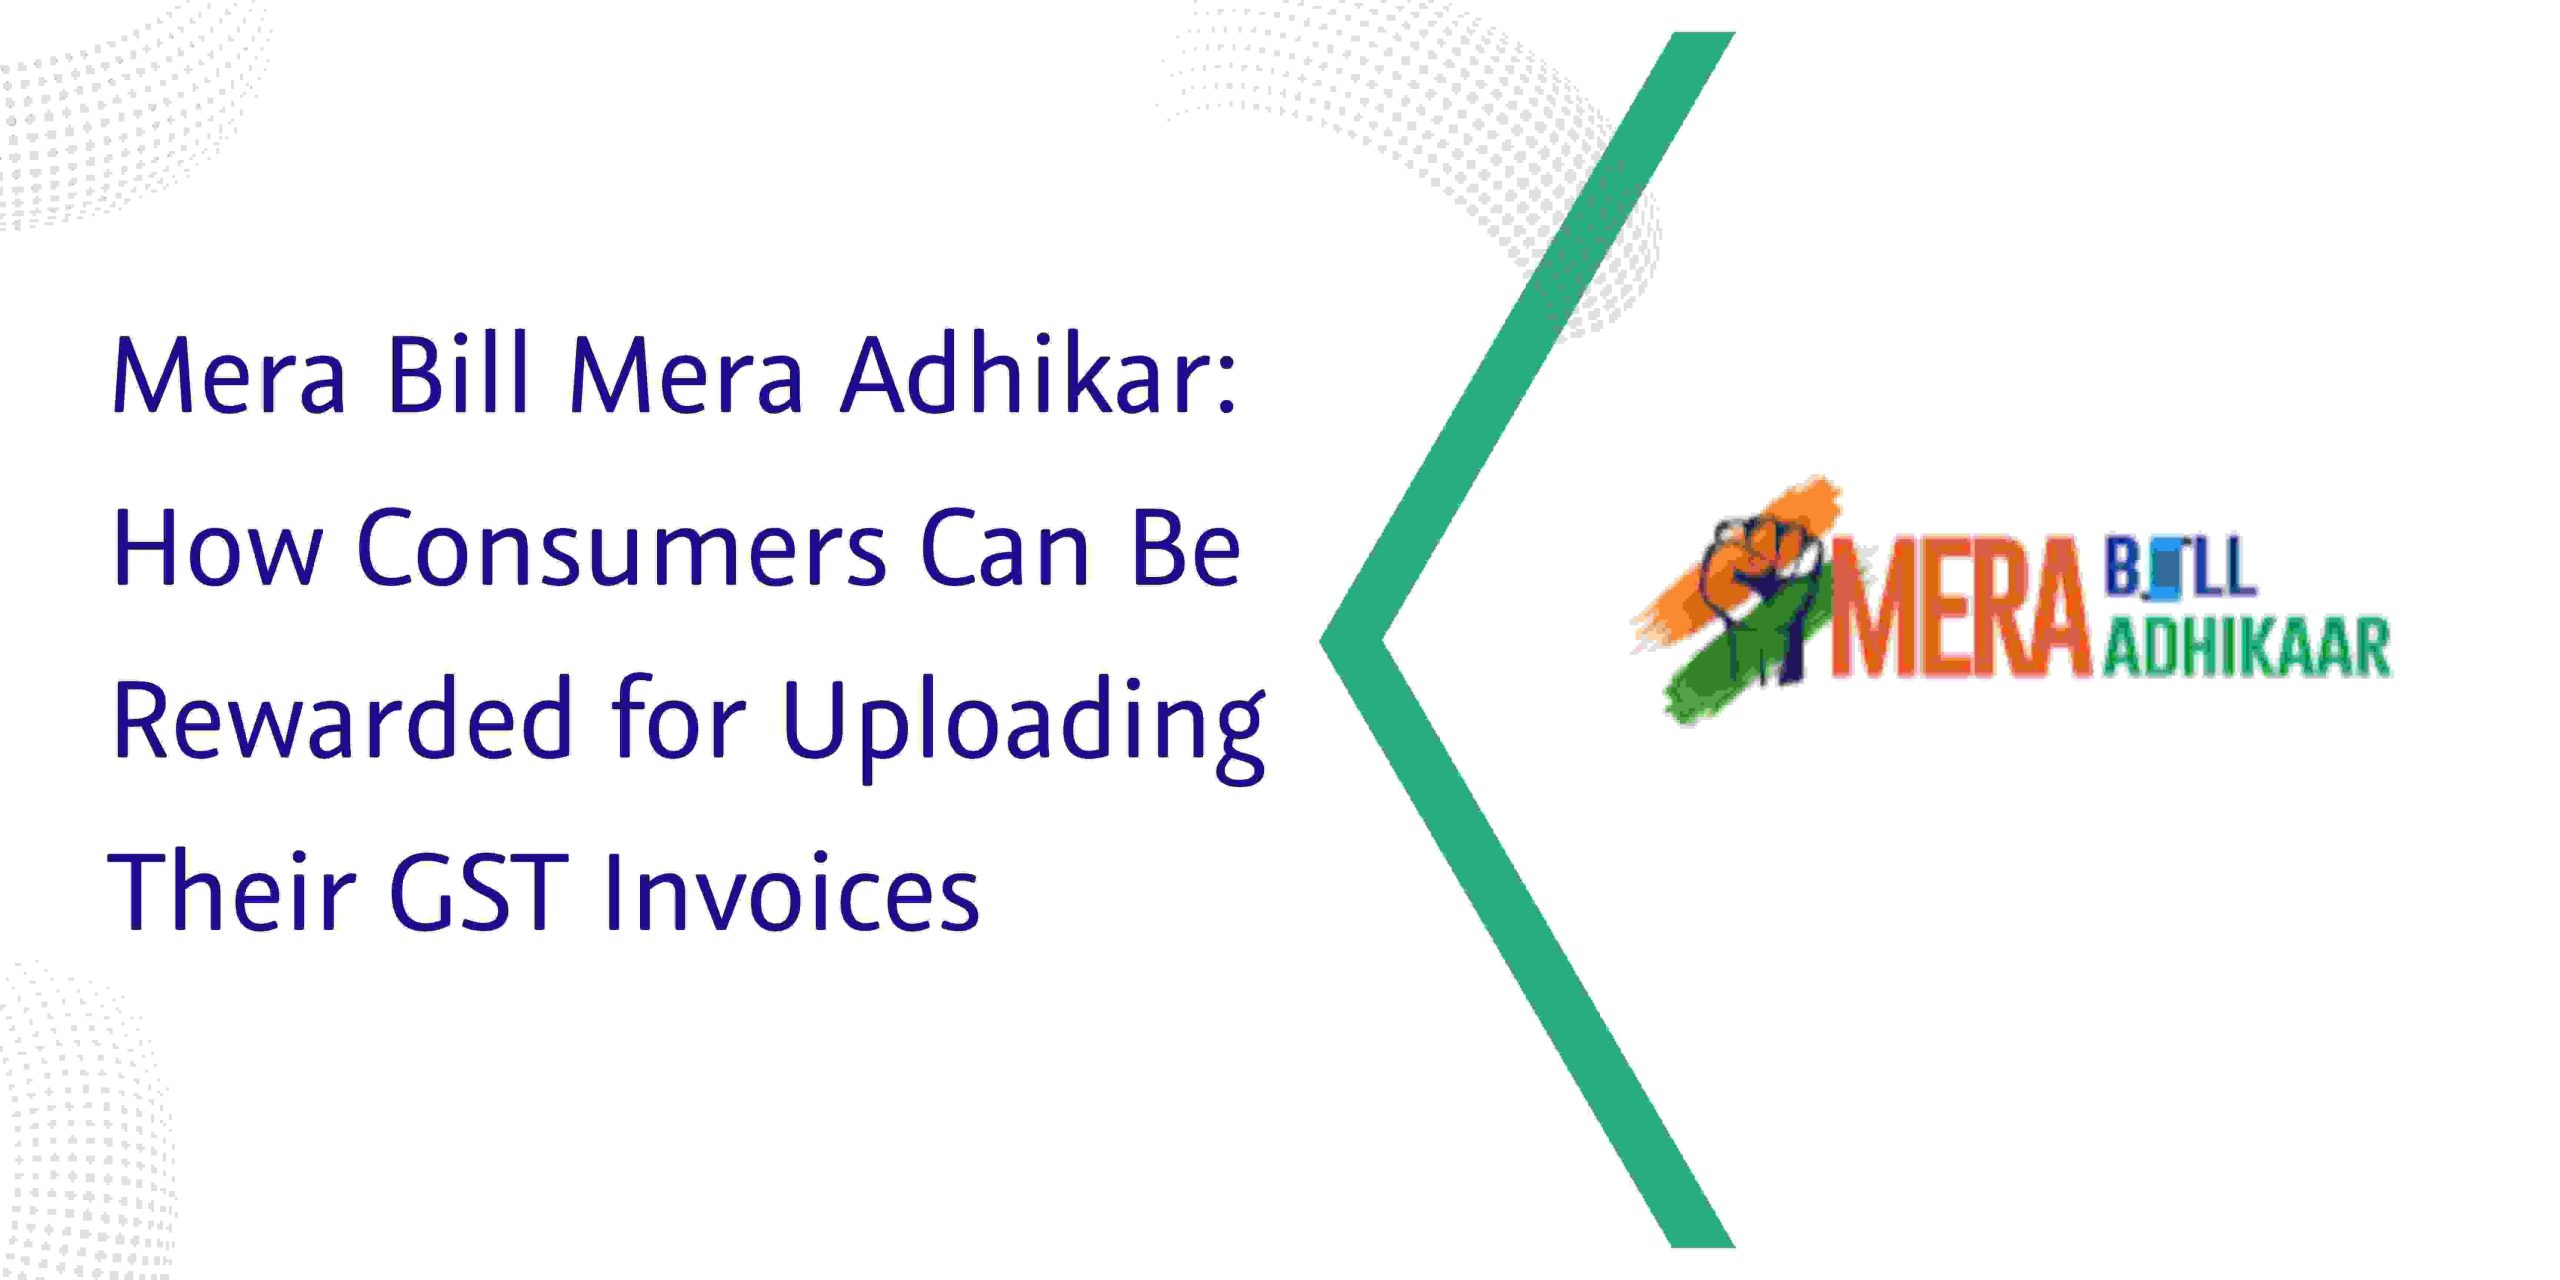 You are currently viewing Mera Bill Mera Adhikar: How Consumers Can Be Rewarded for Uploading Their GST Invoices